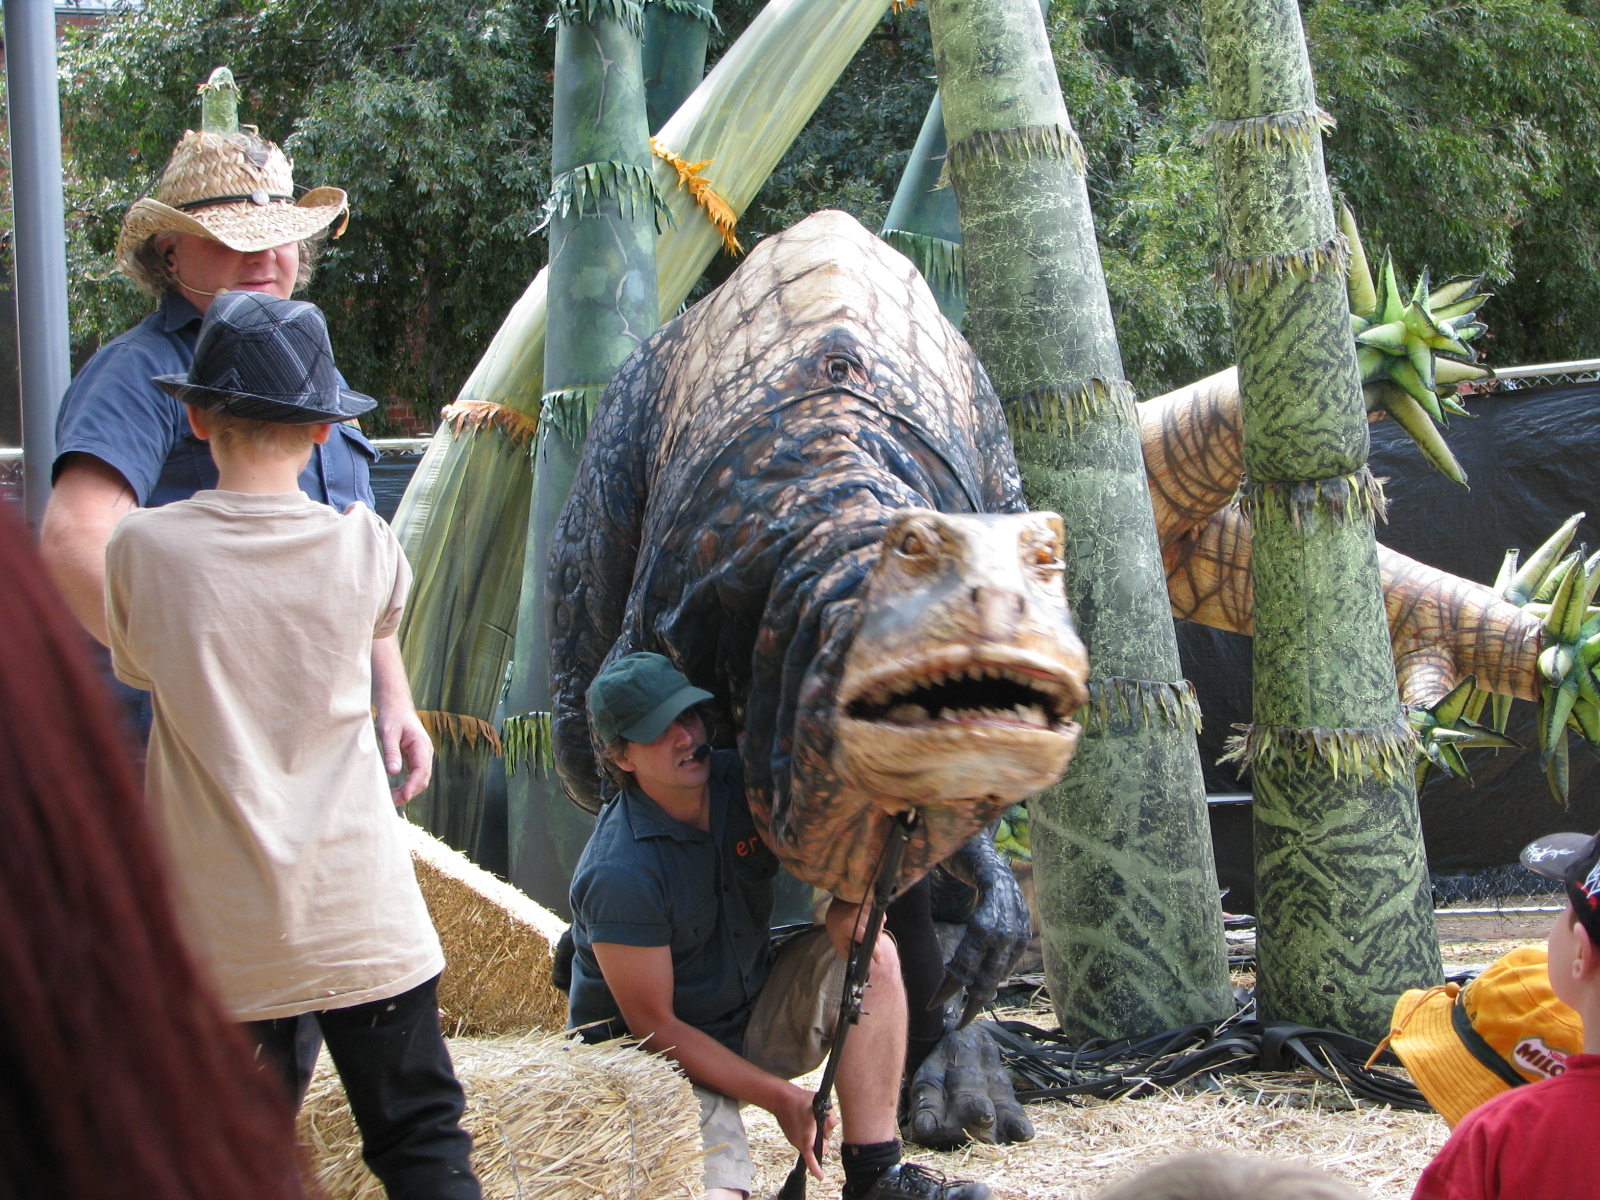 children looking at a dinosaur statue with a man in a straw hat